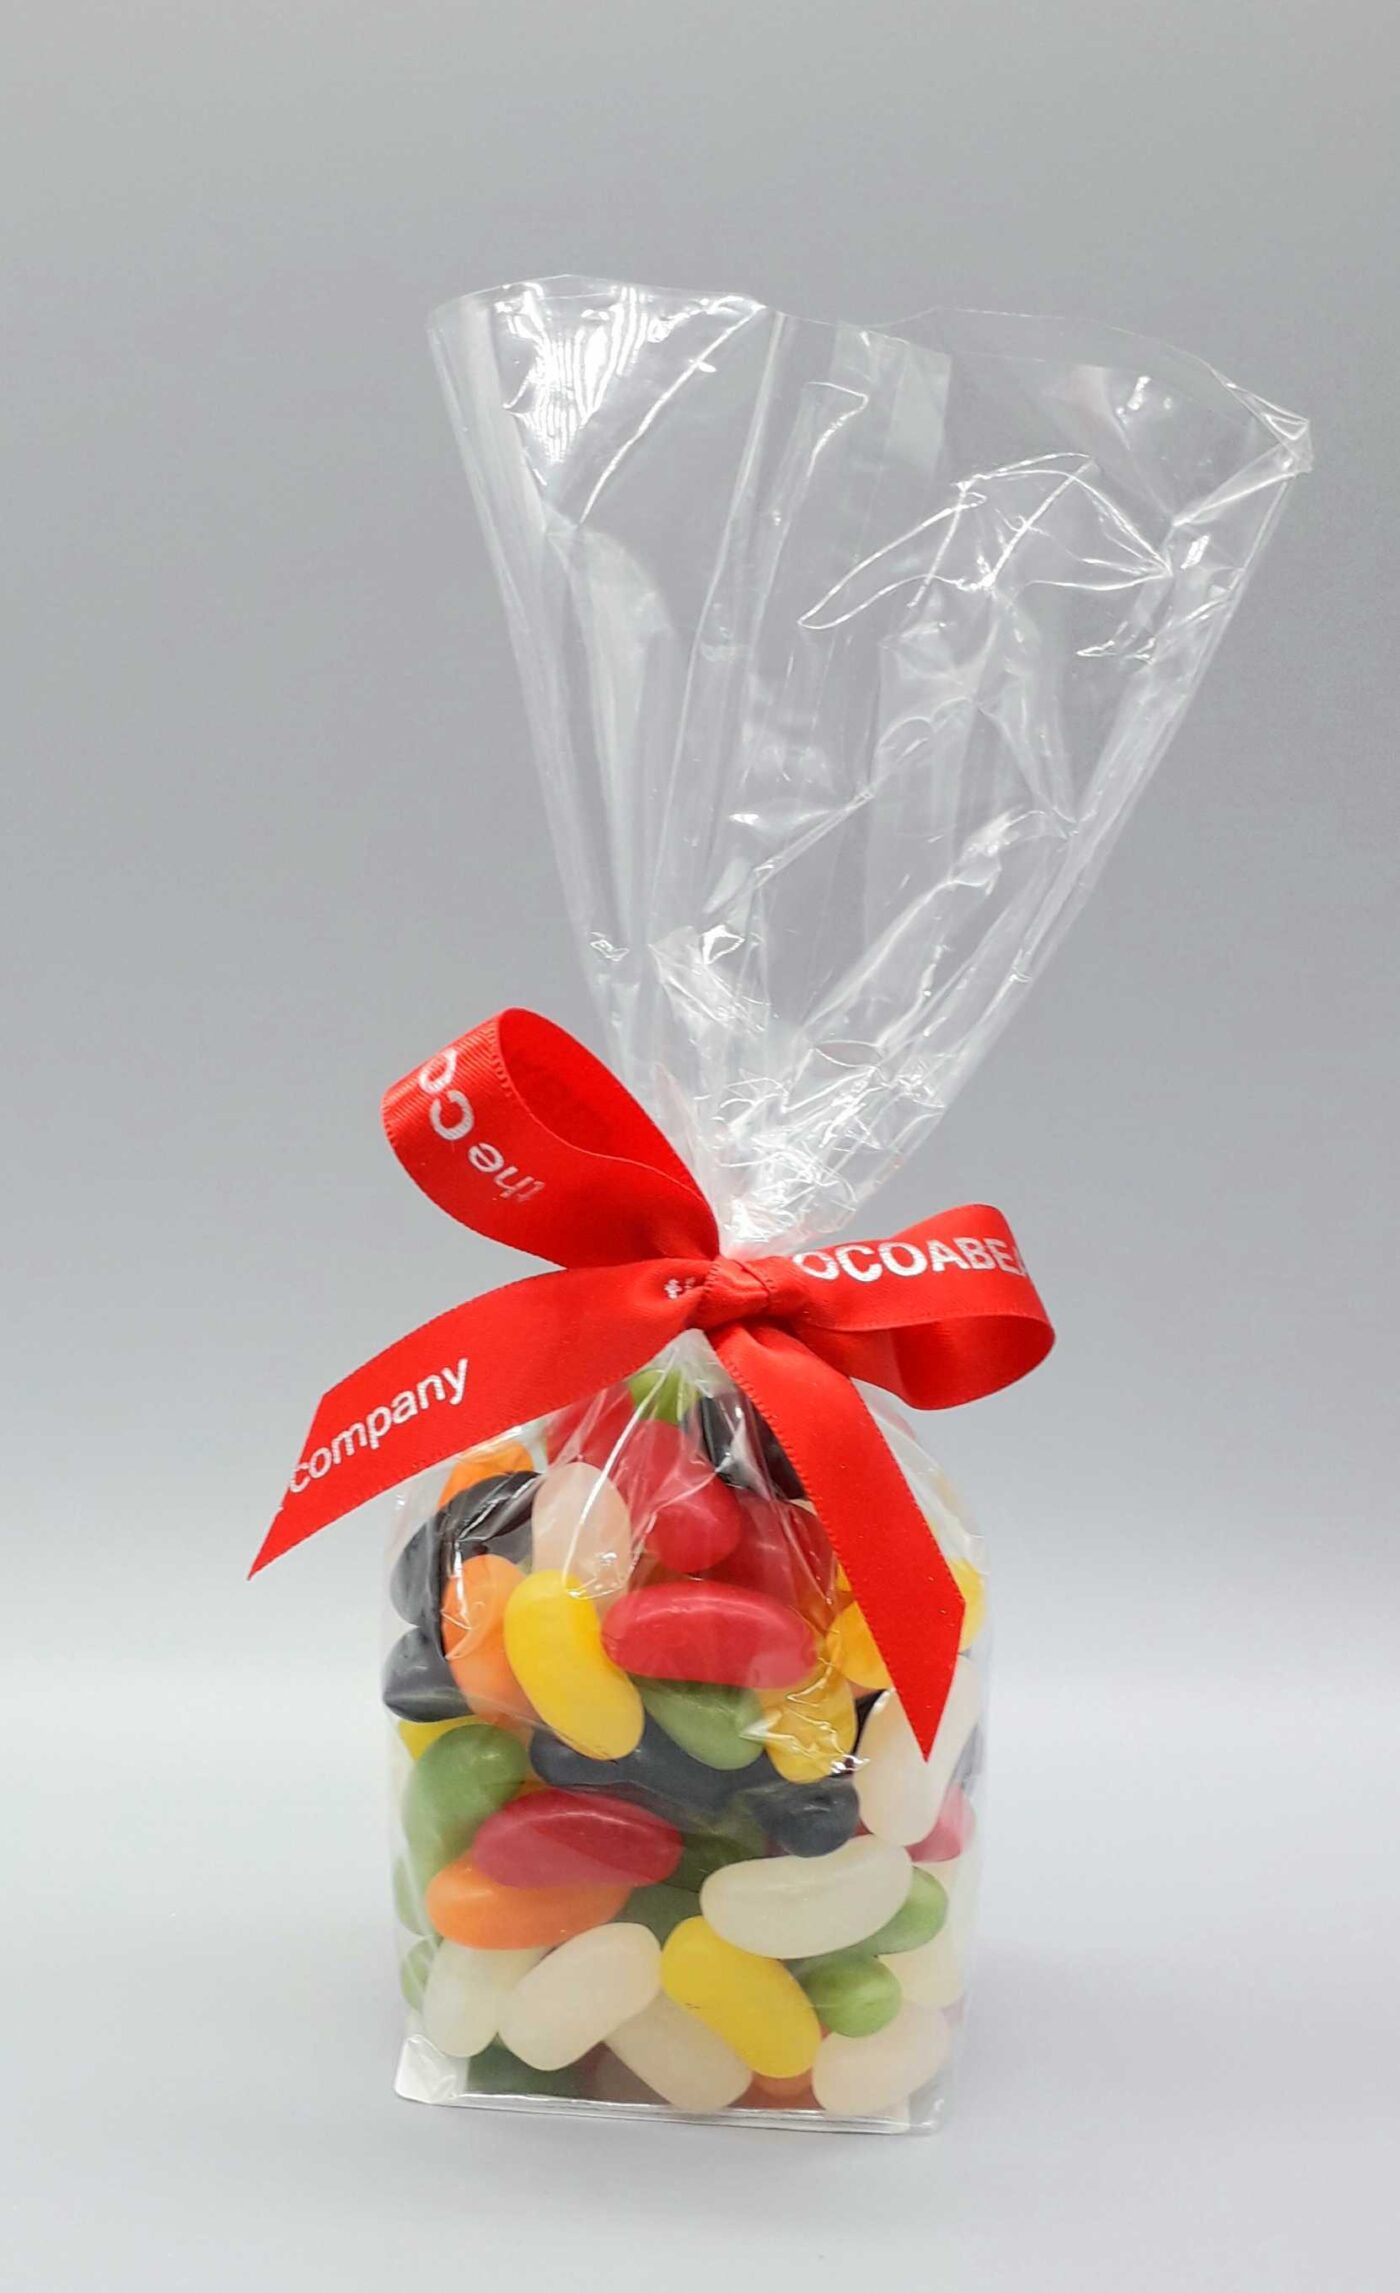 Cocoa Bean Bagged Sweets Jelly Beans - Craigie’s Farm, Deli, Café and ...